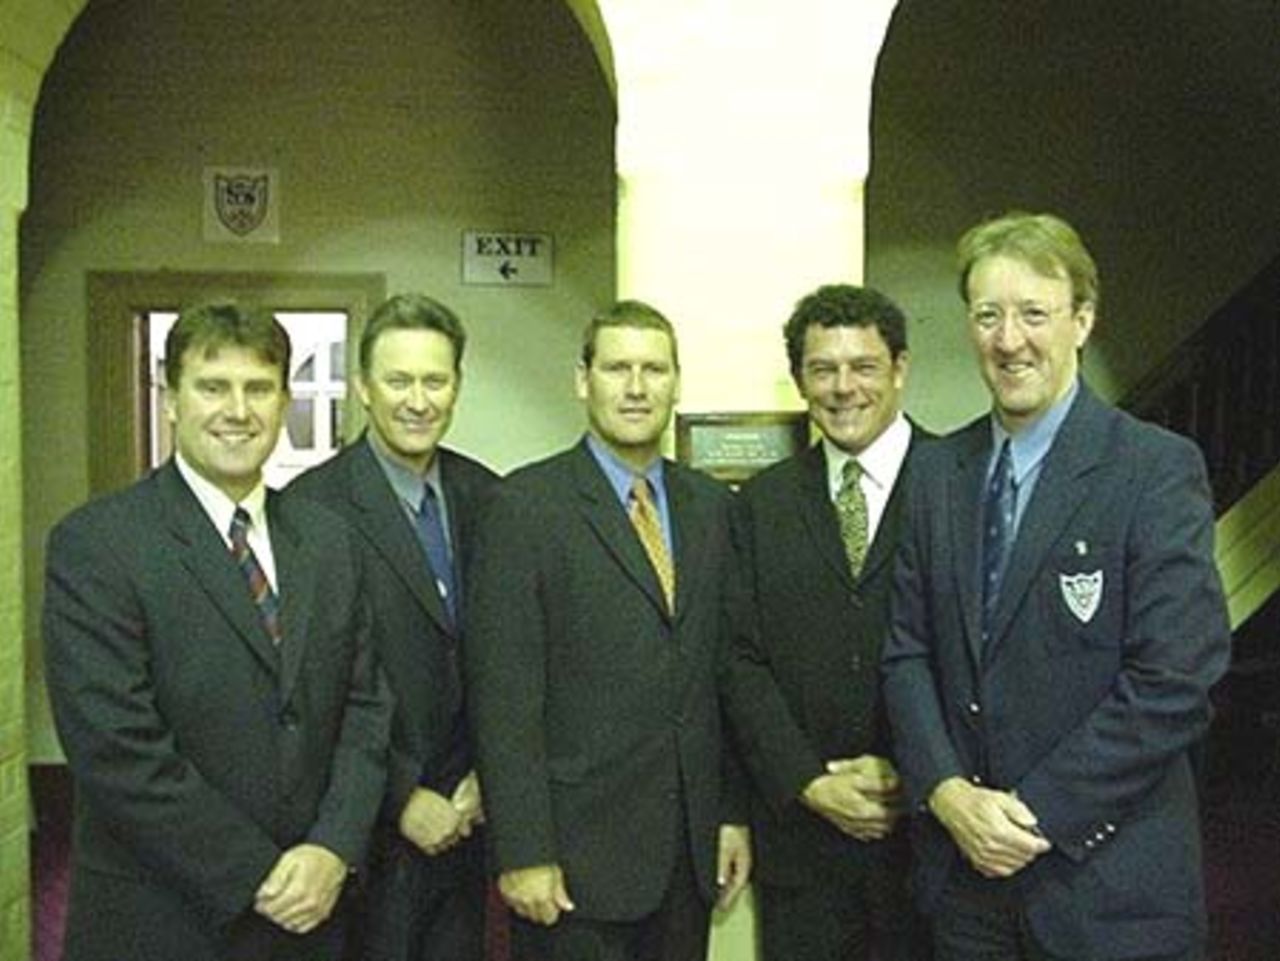 (from left to right) Mark Taylor, John Dyson, Phil Emery, Mike Whitney & Geoff Lawson after accepting life membership of the New South Wales Cricket Association